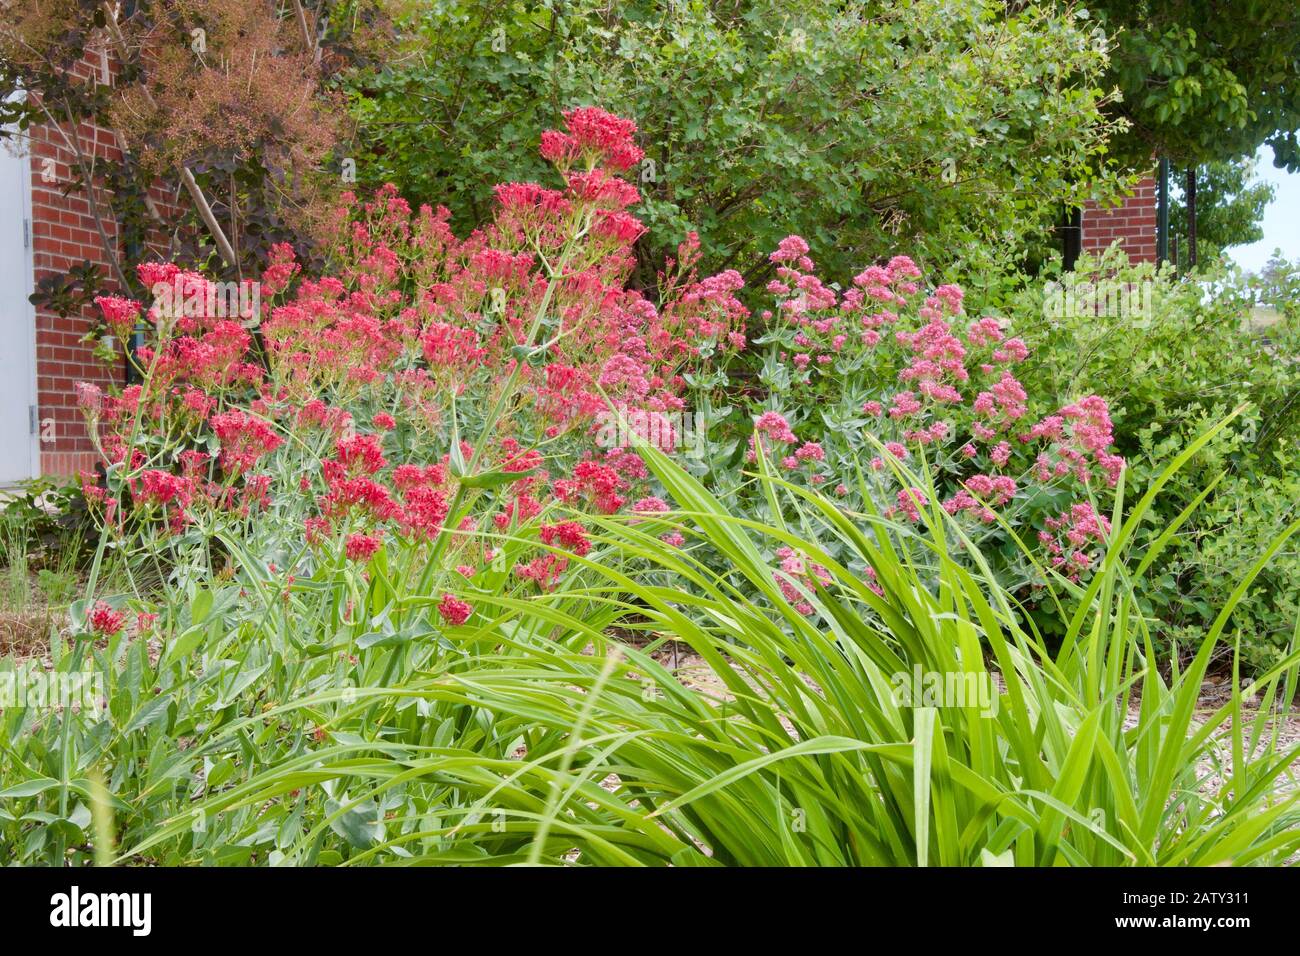 Red Valerian, often called Jupiter's Beard, ranges in flower color from red to pink. Stock Photo